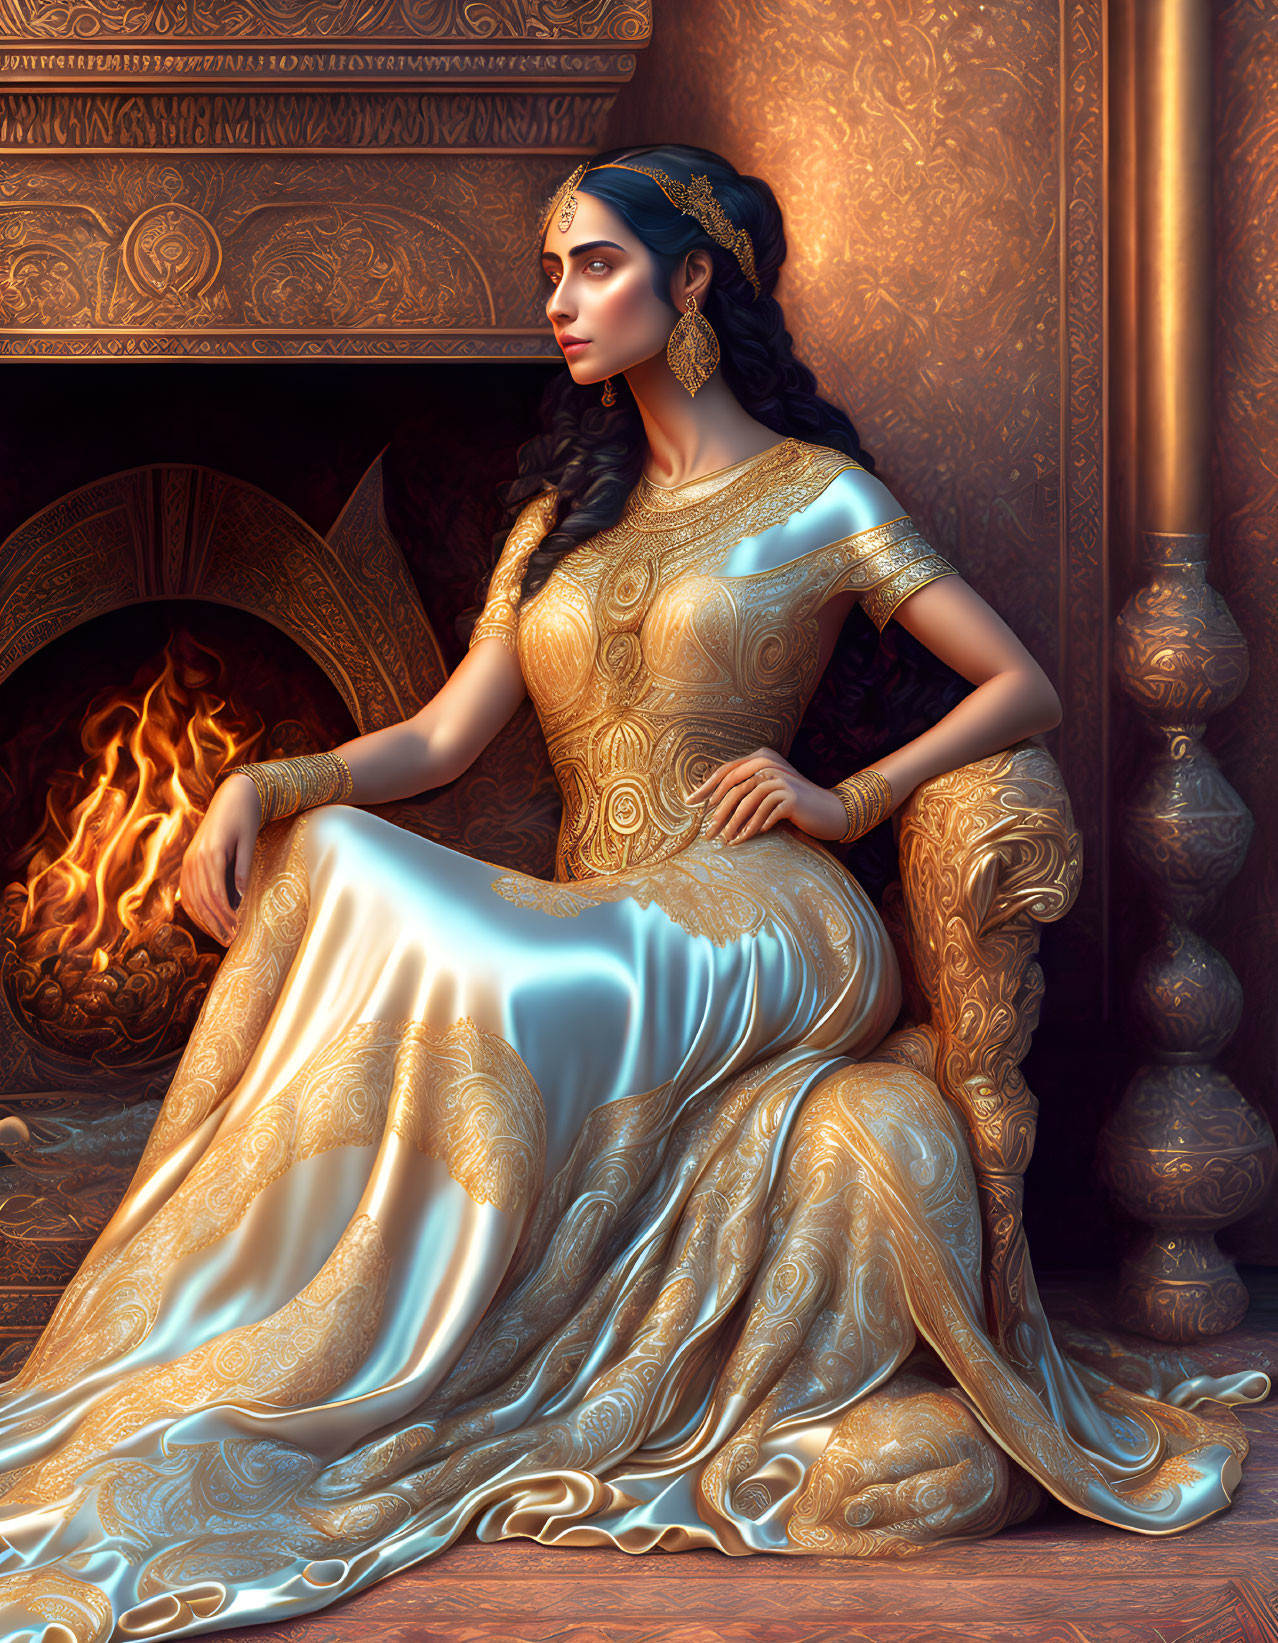 Regal woman in gold-embellished gown by ornate fireplace